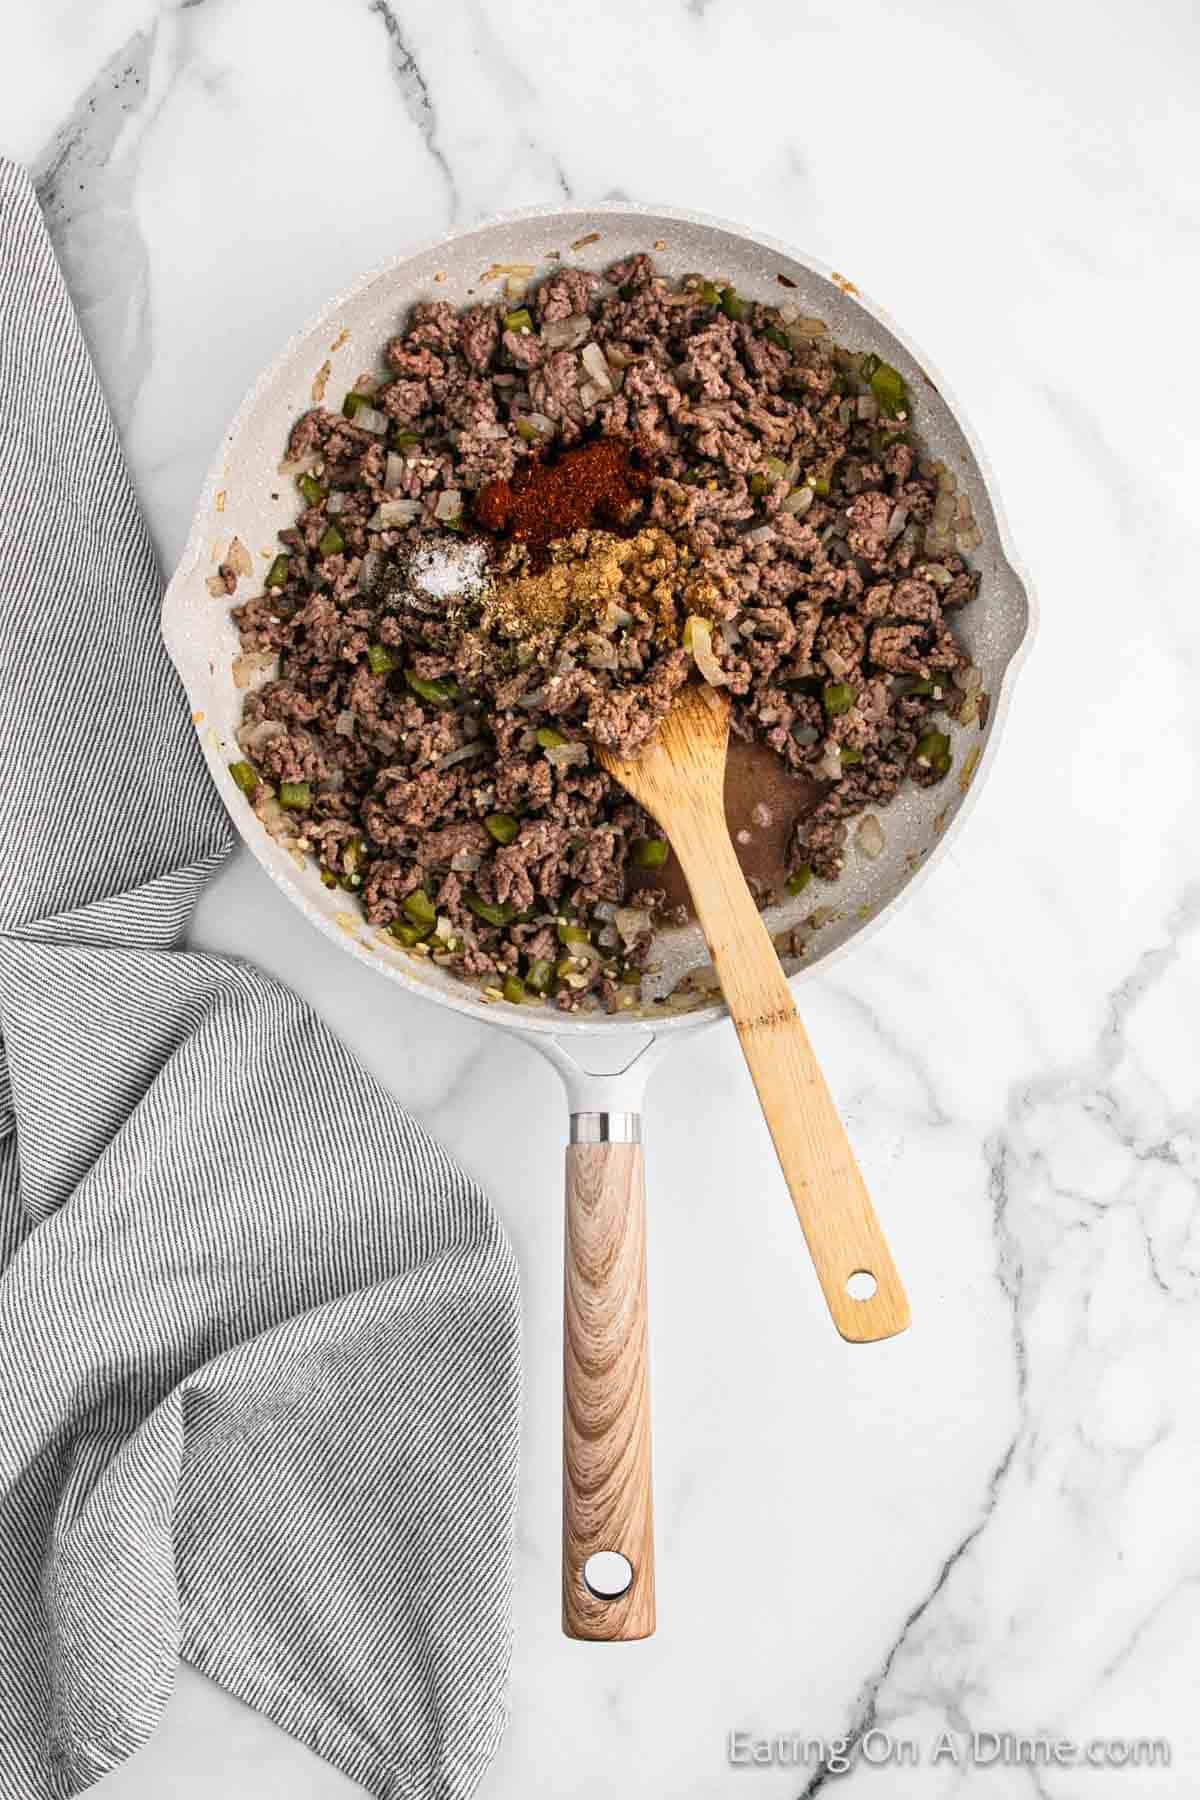 A skillet on a marble countertop contains cooked ground beef mixed with chopped onions and green bell peppers, reminiscent of beef chimichangas. Various spices are heaped on top of the mixture. A wooden spatula rests in the skillet, while a gray-and-white striped kitchen towel is placed beside it.